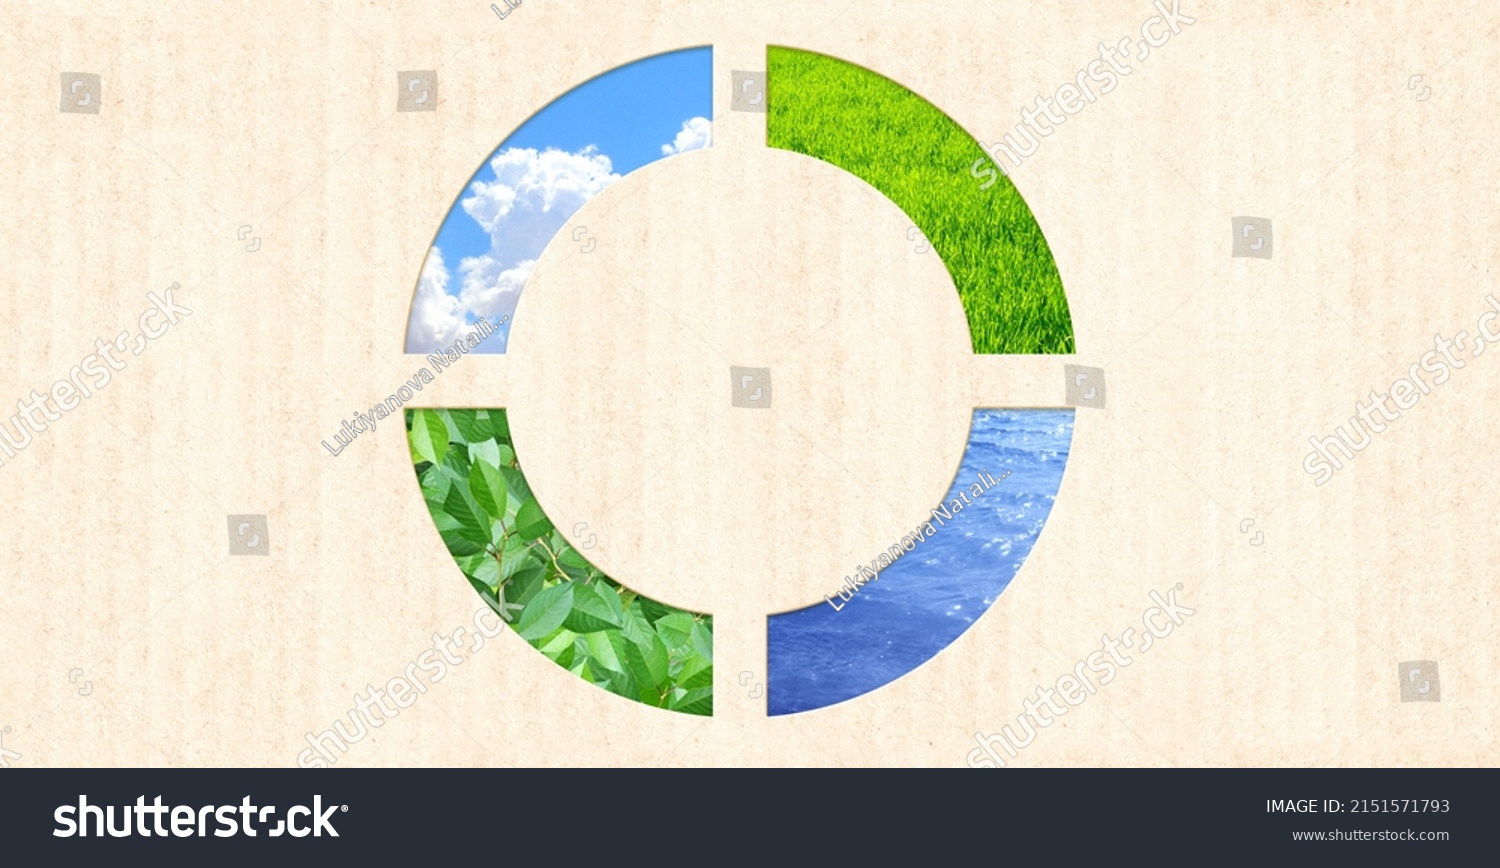 Nature resource and cardboard texture. Horizontal banner with eco paper texture and grass, sky, water. Ecology and zero waste concept. Global ecological resource. Copy space for text. Mock up template #2151571793